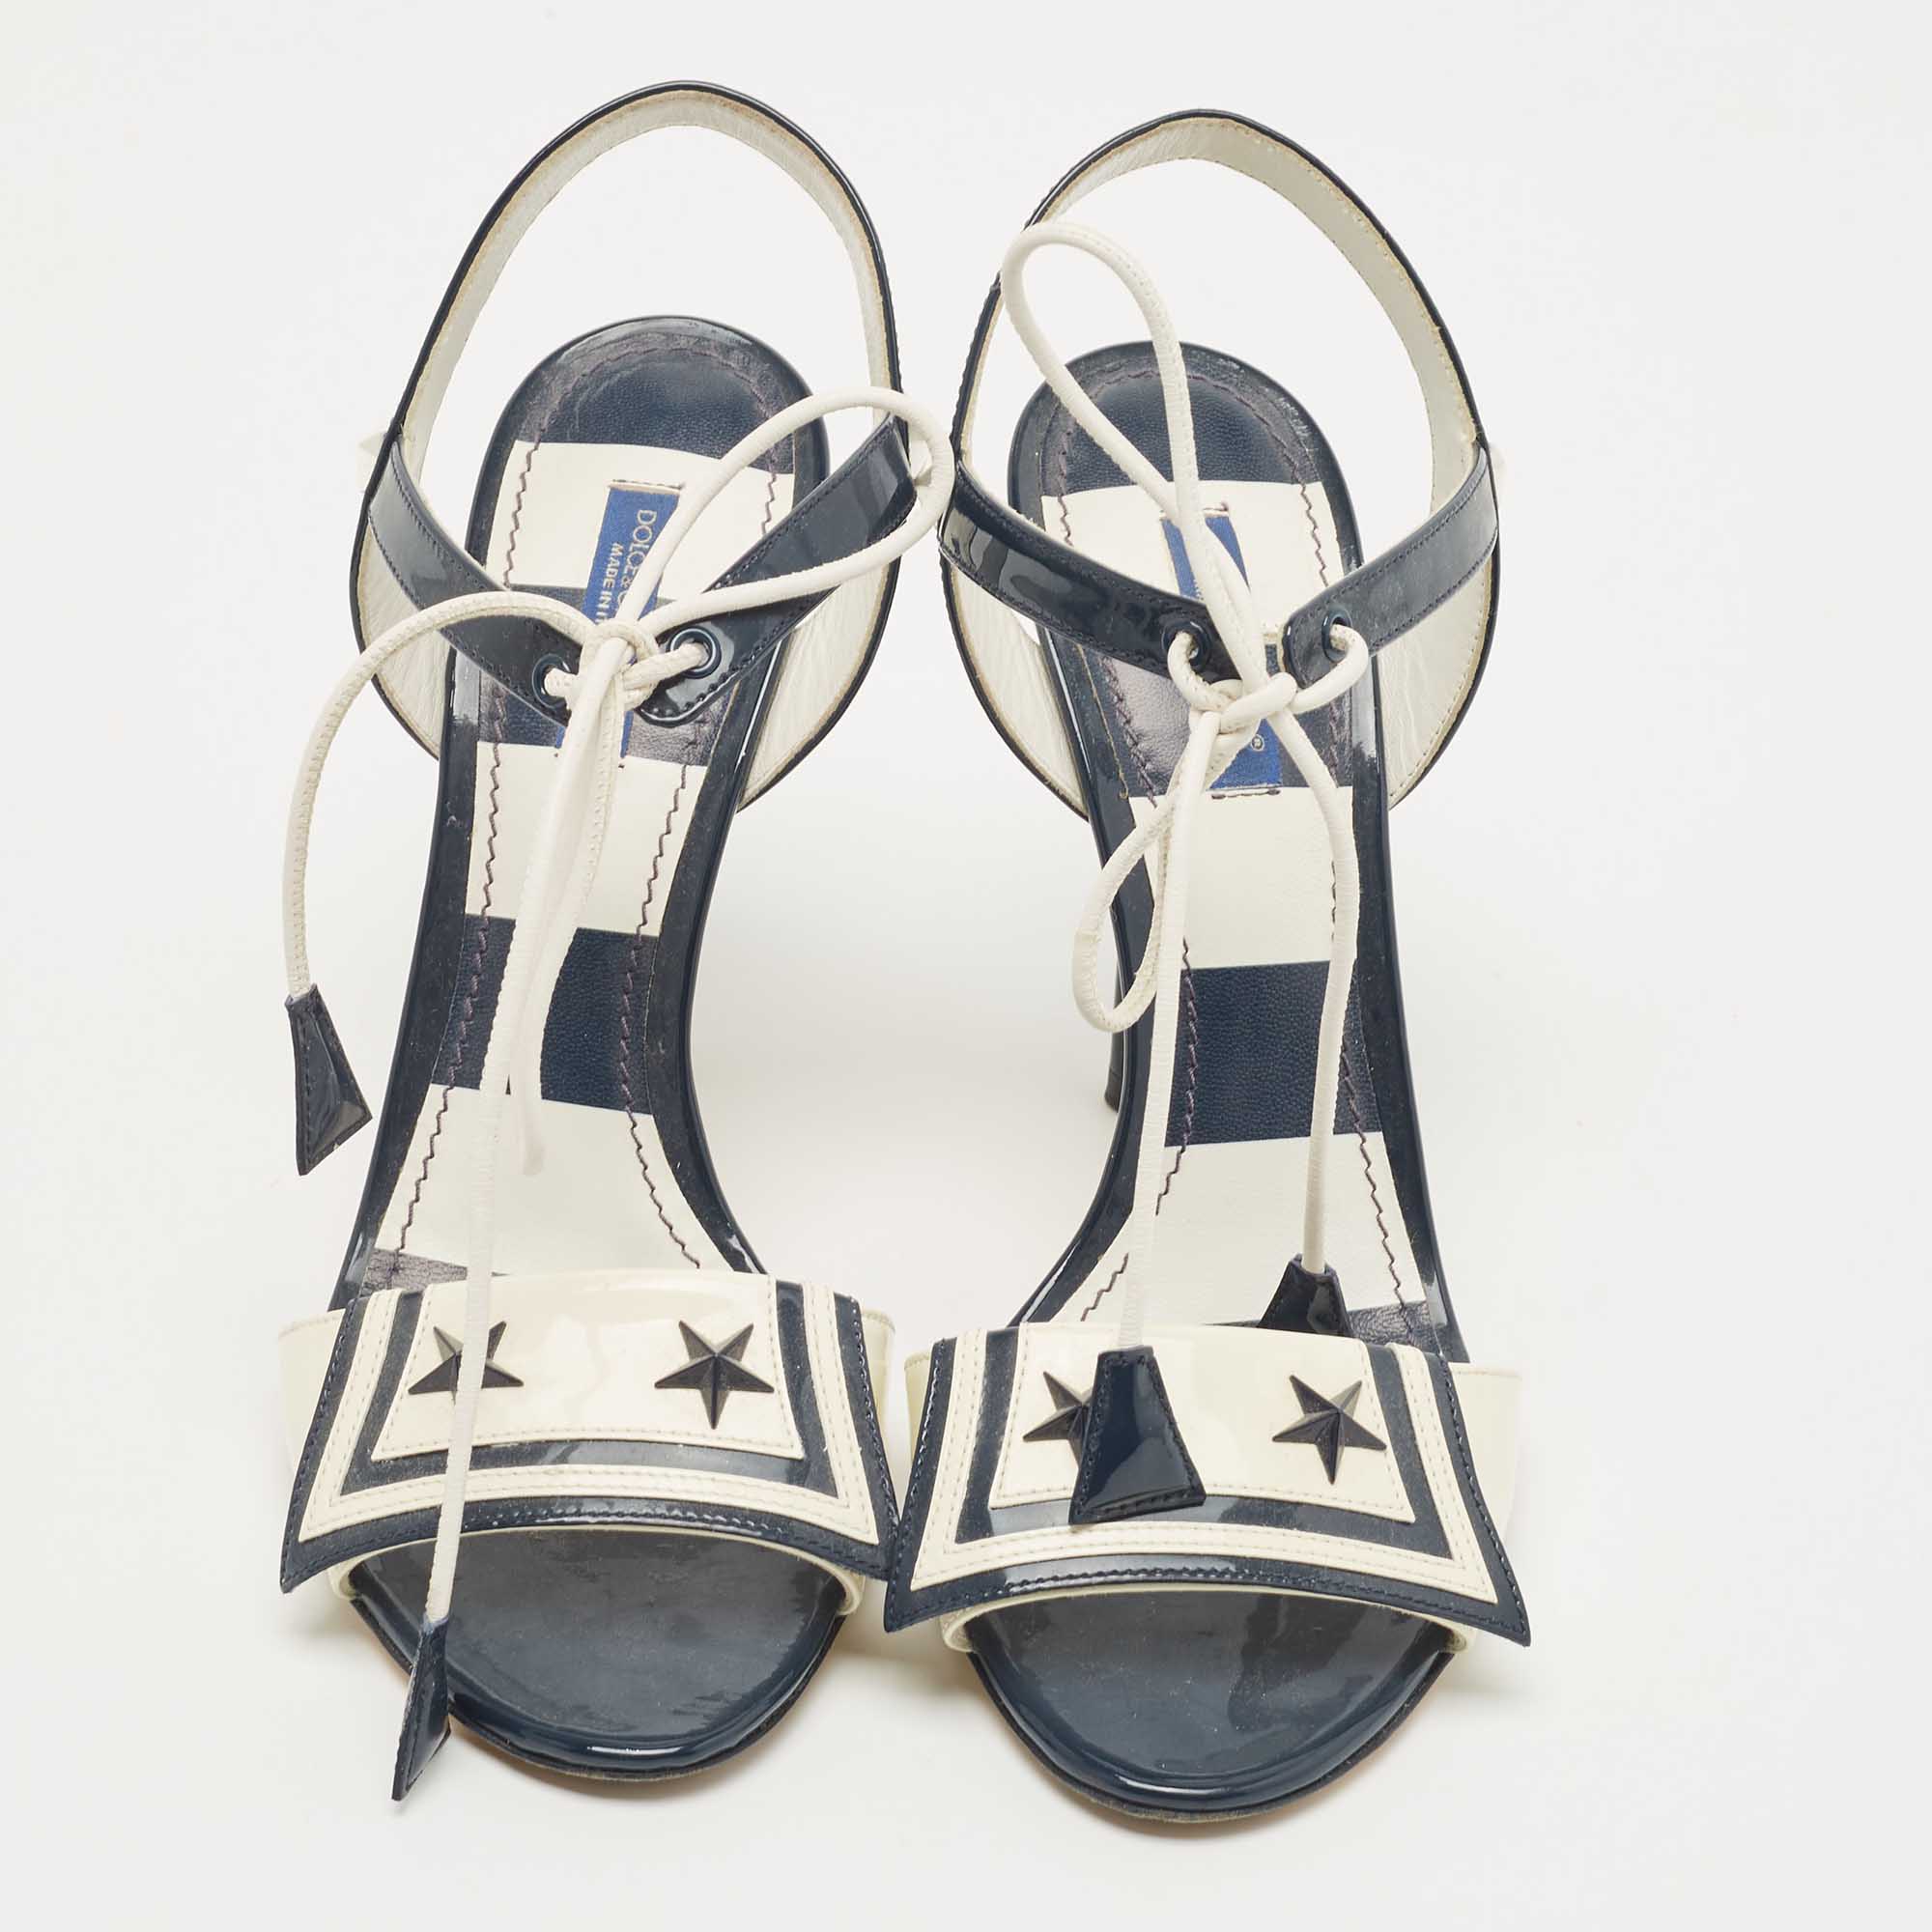 Dolce & Gabbana Navy Blue/Off White Patent Leather Ankle Tie Sandals Size 38